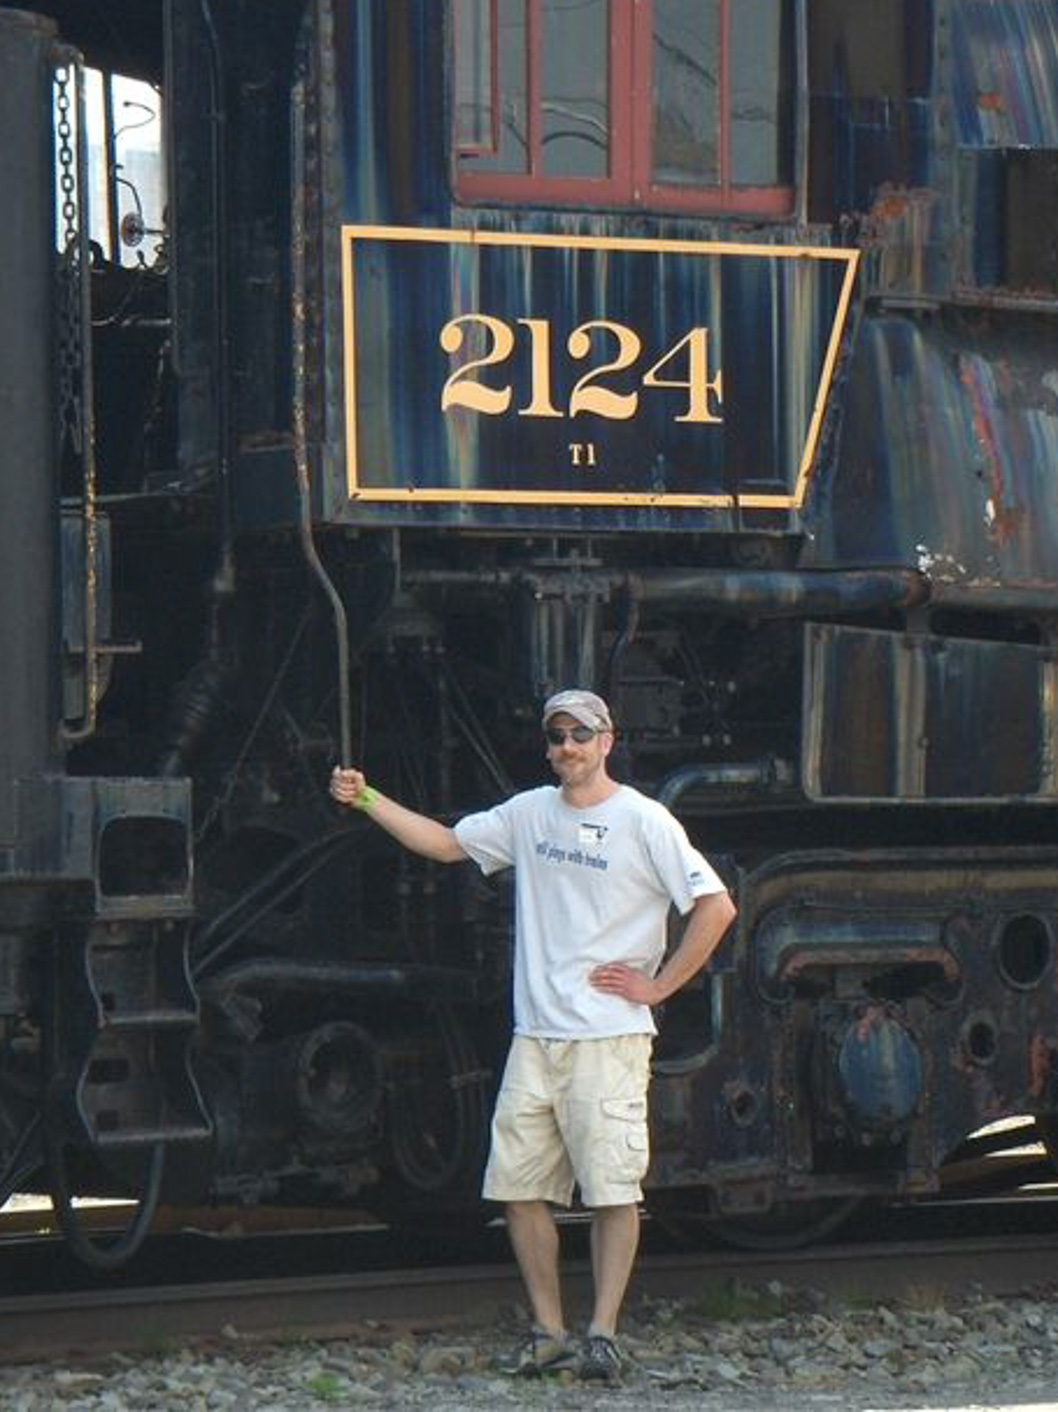 Greg Mugione, Middle School Performing Arts Department Chair at McLean School, stands beside a steam engine